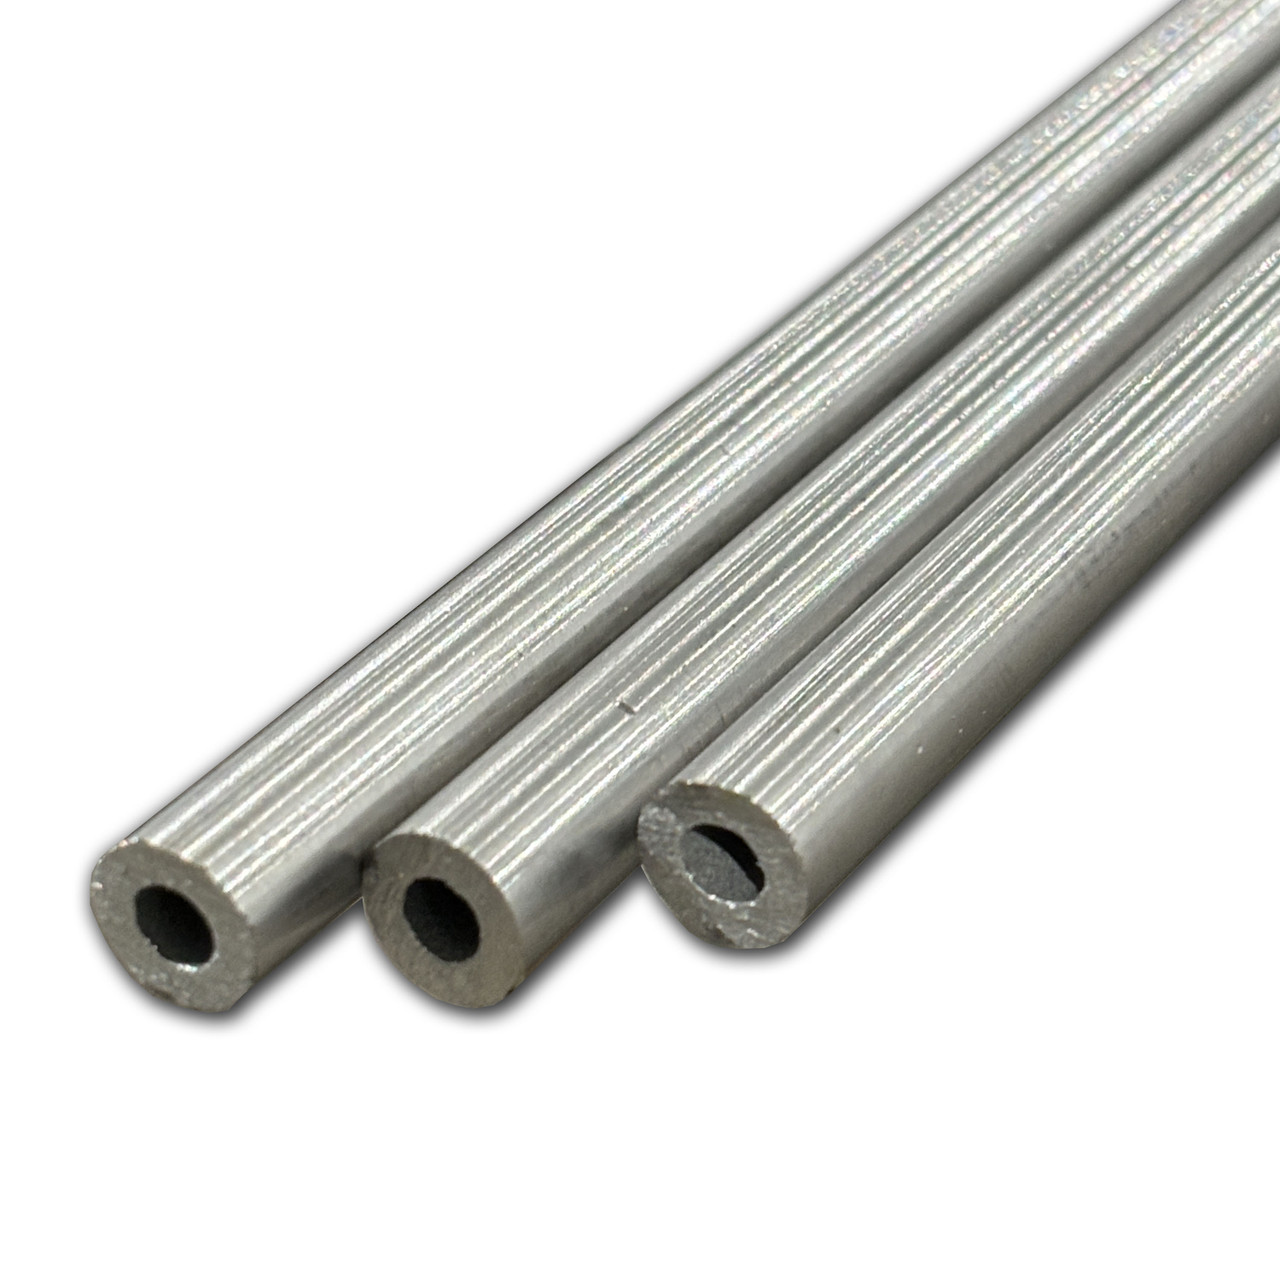 0.313" OD x 0.083" Wall x 72 inches (3 Pack), 304 Stainless Steel Round Tube, Seamless